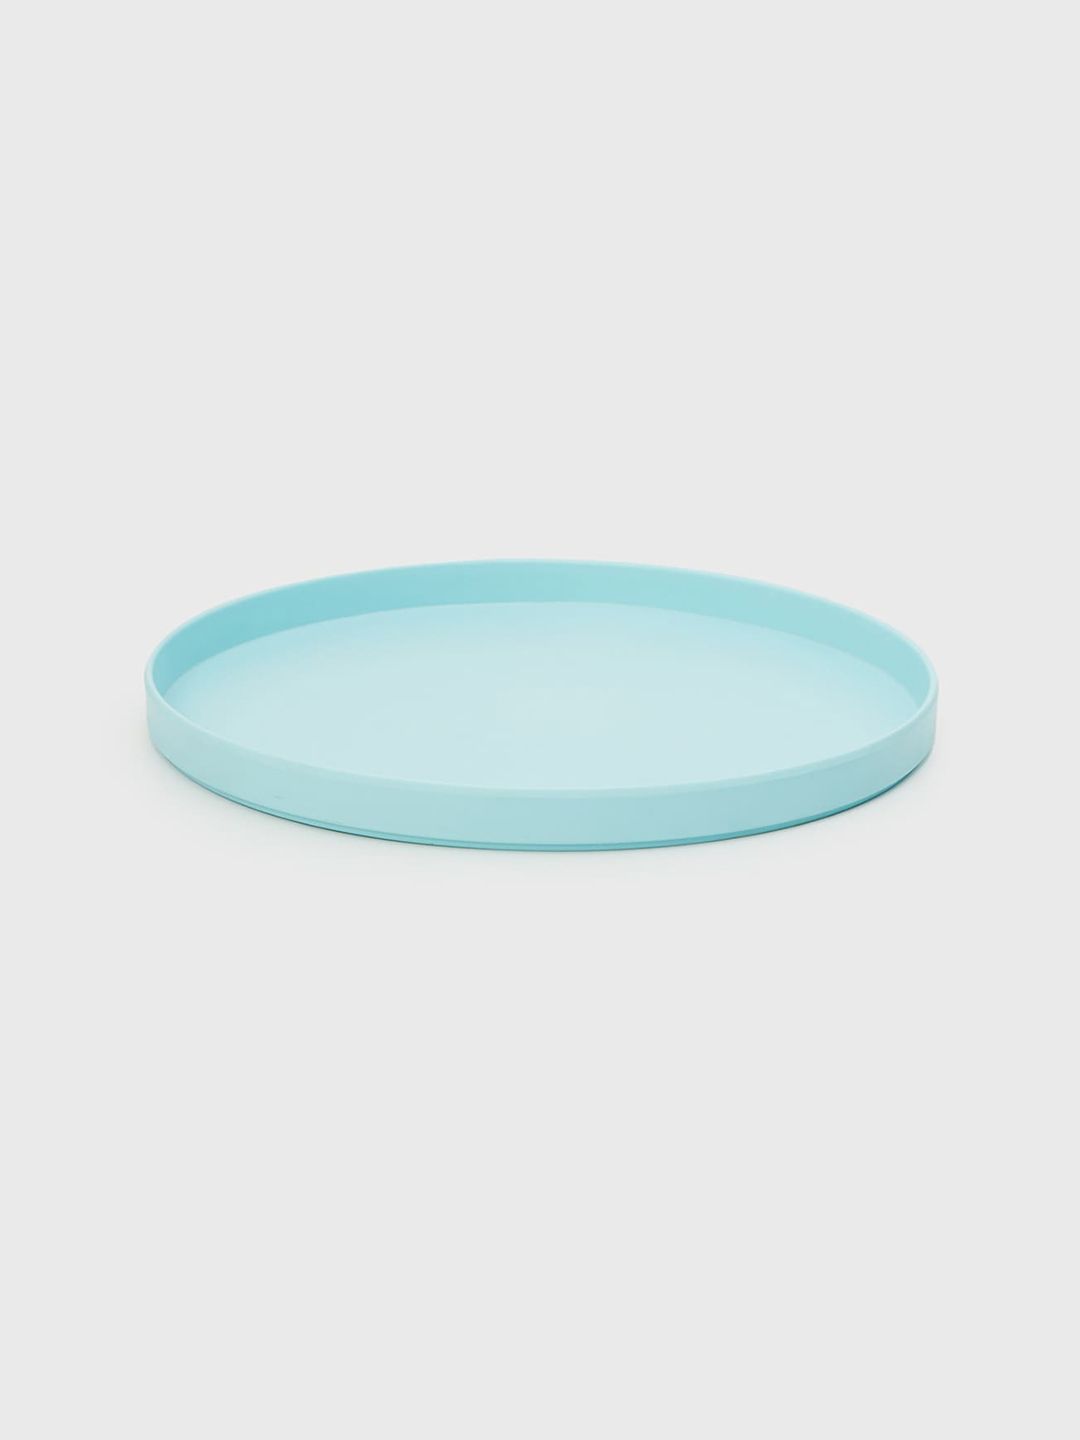 Home Centre Teal Blue Solid Melamine Side Plate Price in India